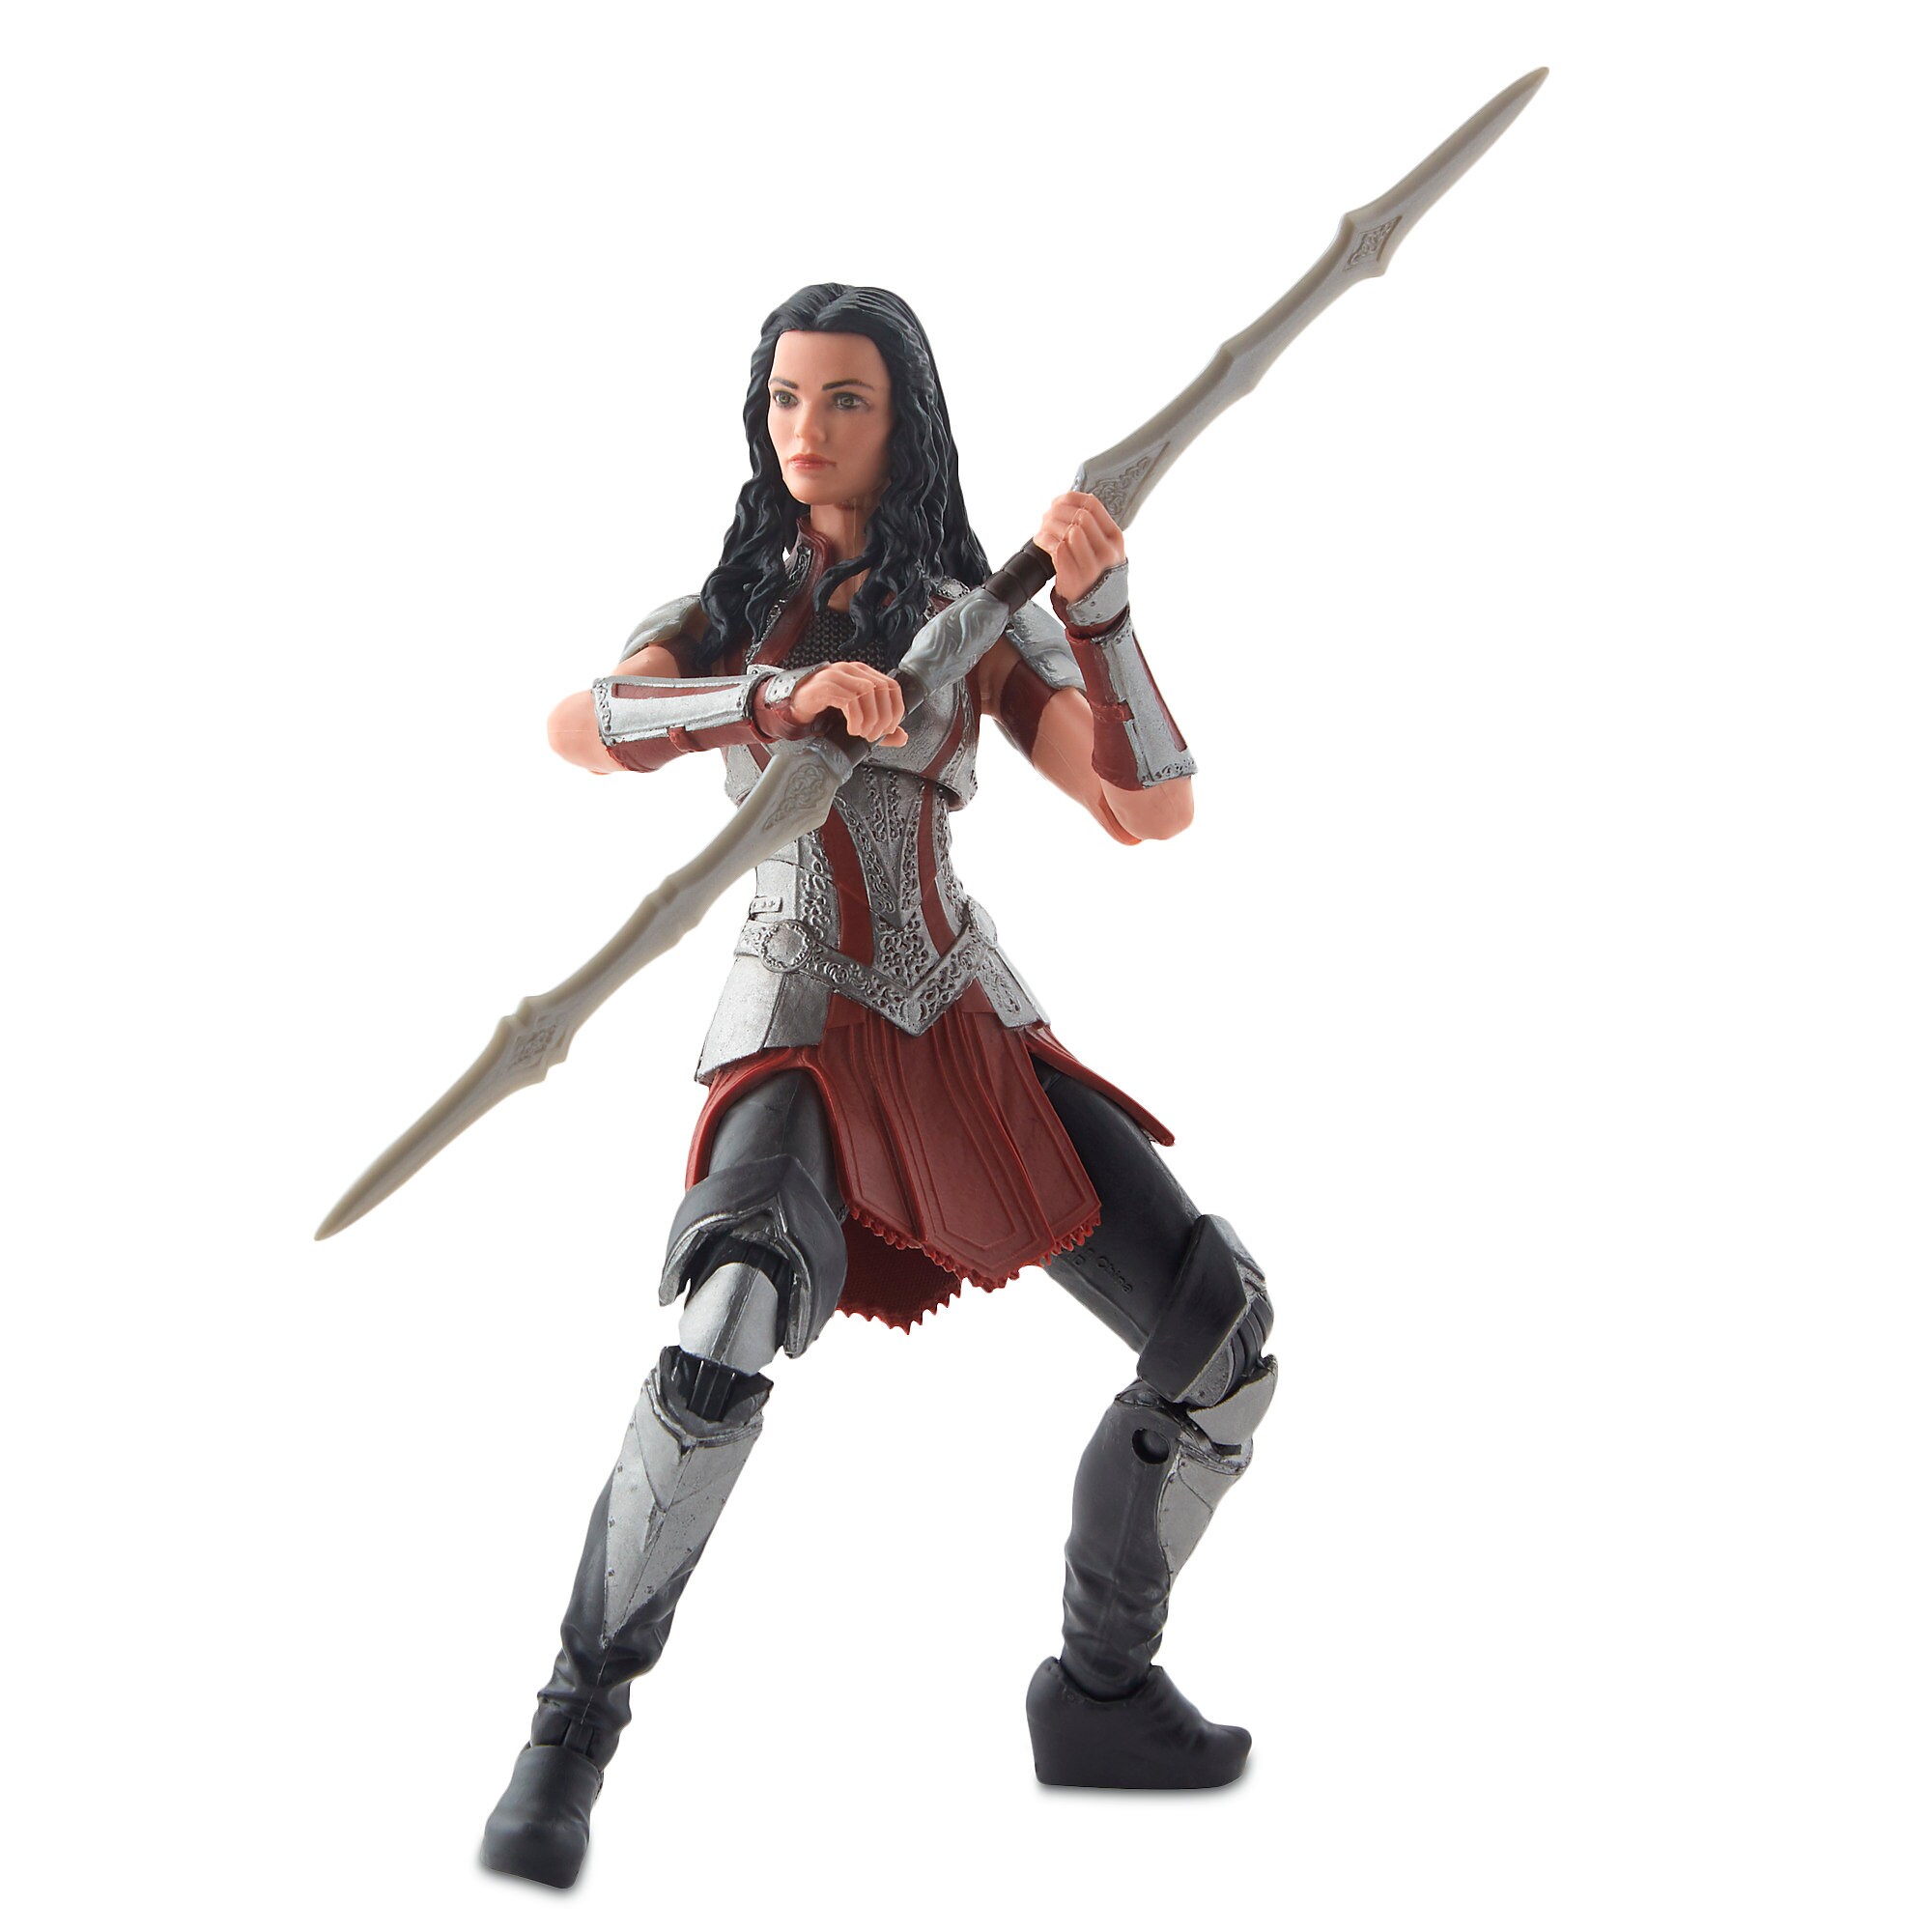 Thor and Sif Action Figure Set - Legends Series - Marvel Studios 10th Anniversary